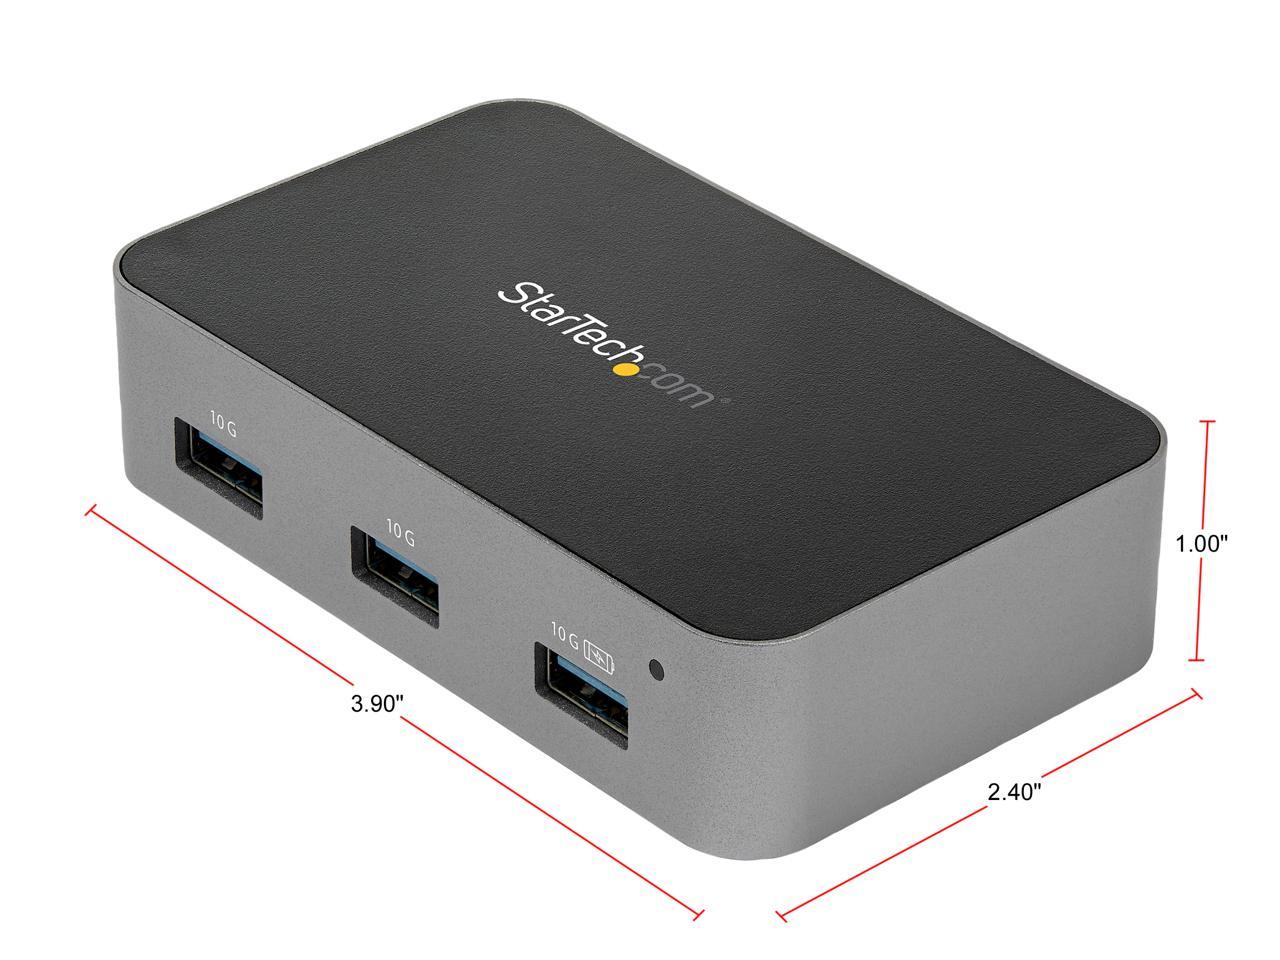 StarTech.com 4 Port USB C Hub with Power Adapter - USB 3.2 Gen 2 (10Gbps) - USB Type C to 4x USB-A - Self Powered Desktop USB Hub with Fast Charging Port (BC 1.2) - Desk Mountable - image 3 of 5